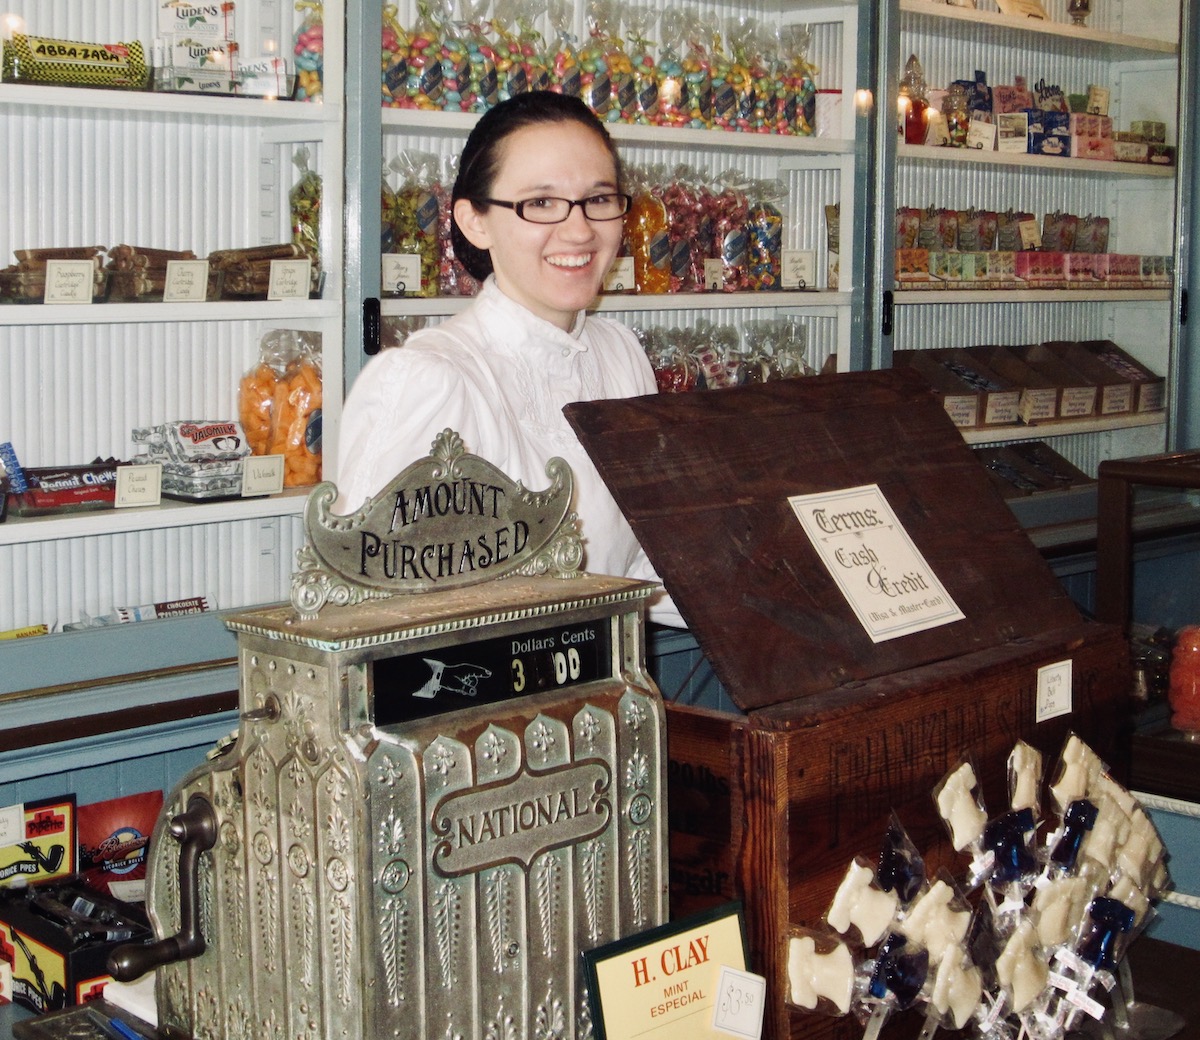 Shane's Candy Counter is an irresistable old-fashioned candy store